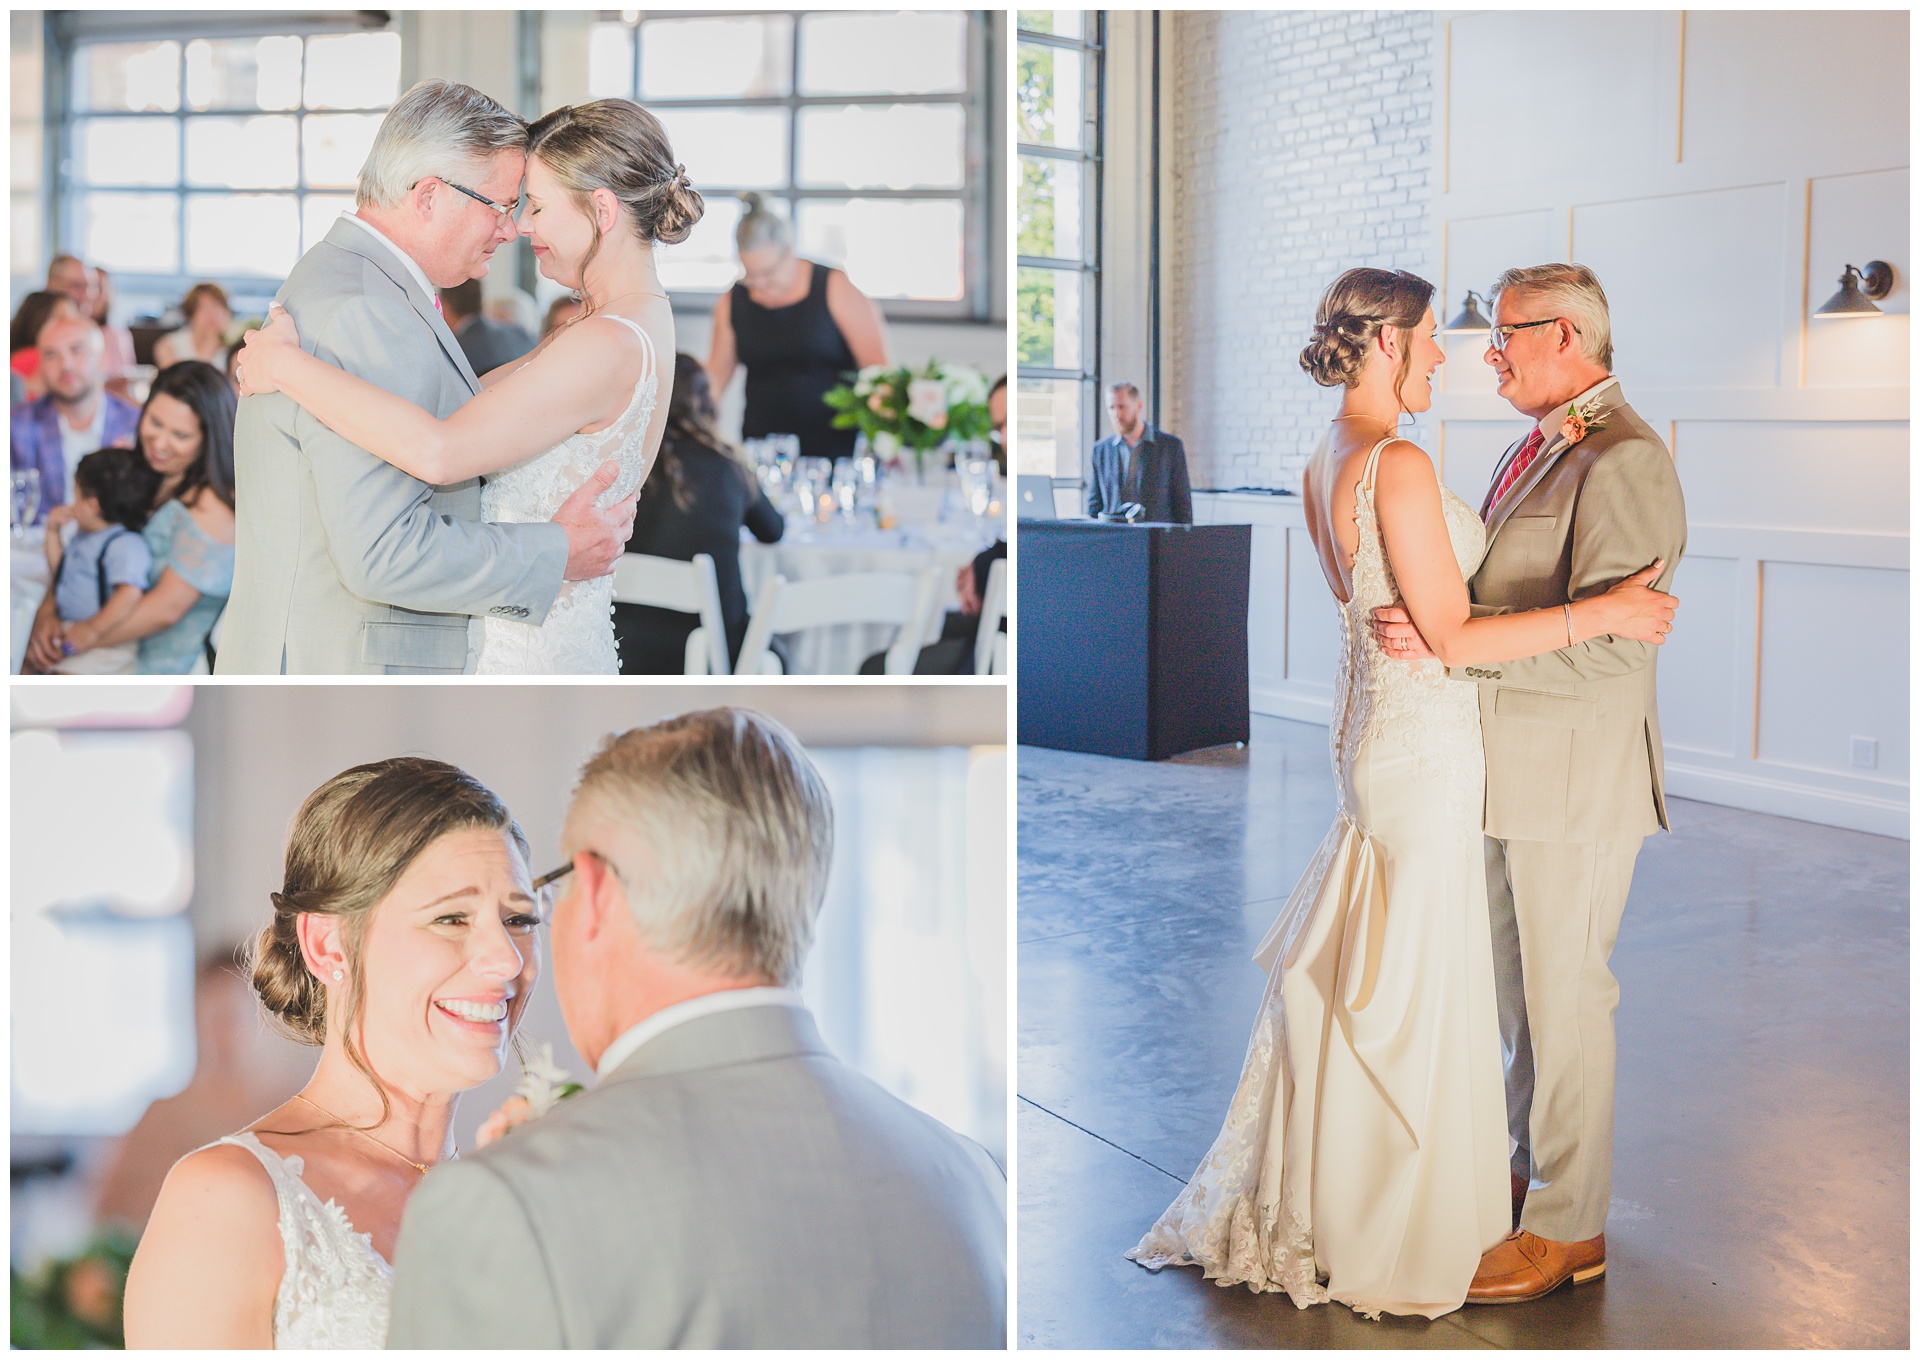 Wedding photography at 28 Event Space by Kansas City wedding photographers Wisdom-Watson Weddings.